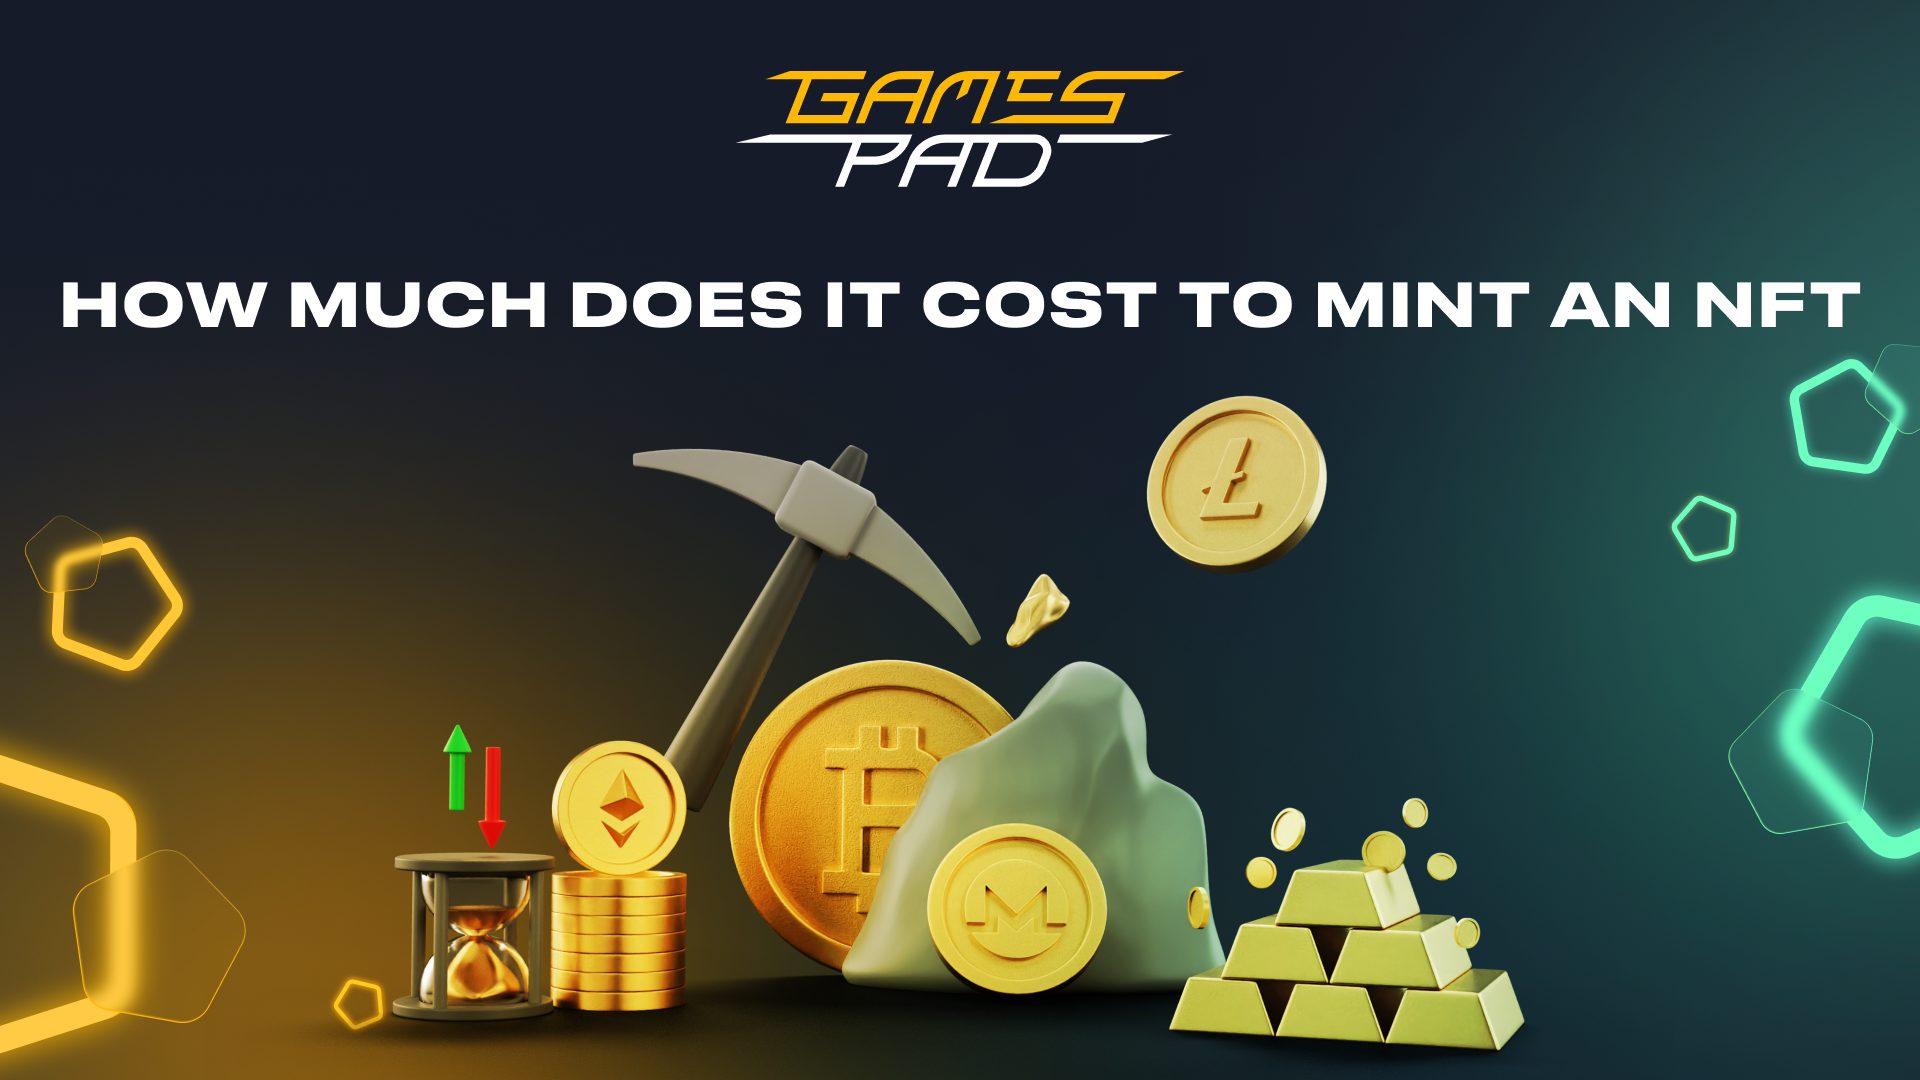 How much does it cost to mint an NFT?